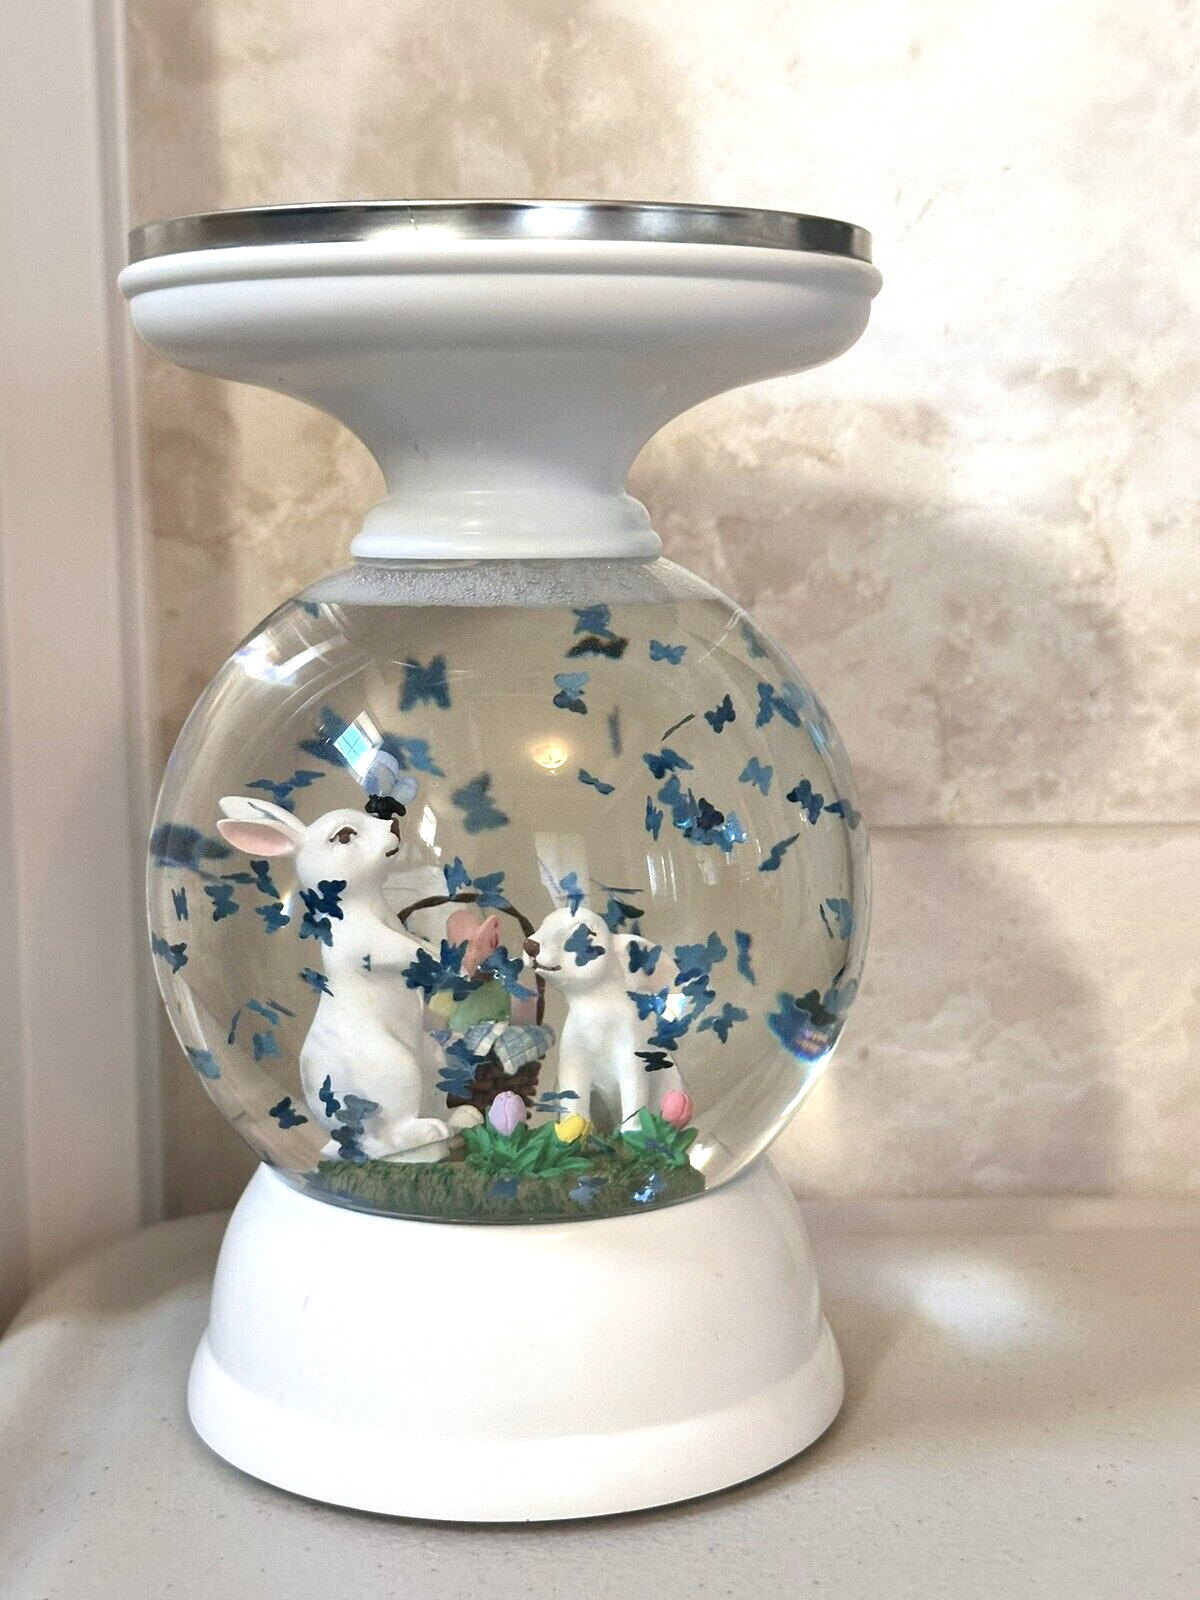 Bath & Body Works Easter Bunny Rabbit Water Globe Pedestal 3-Wick Candle Holder